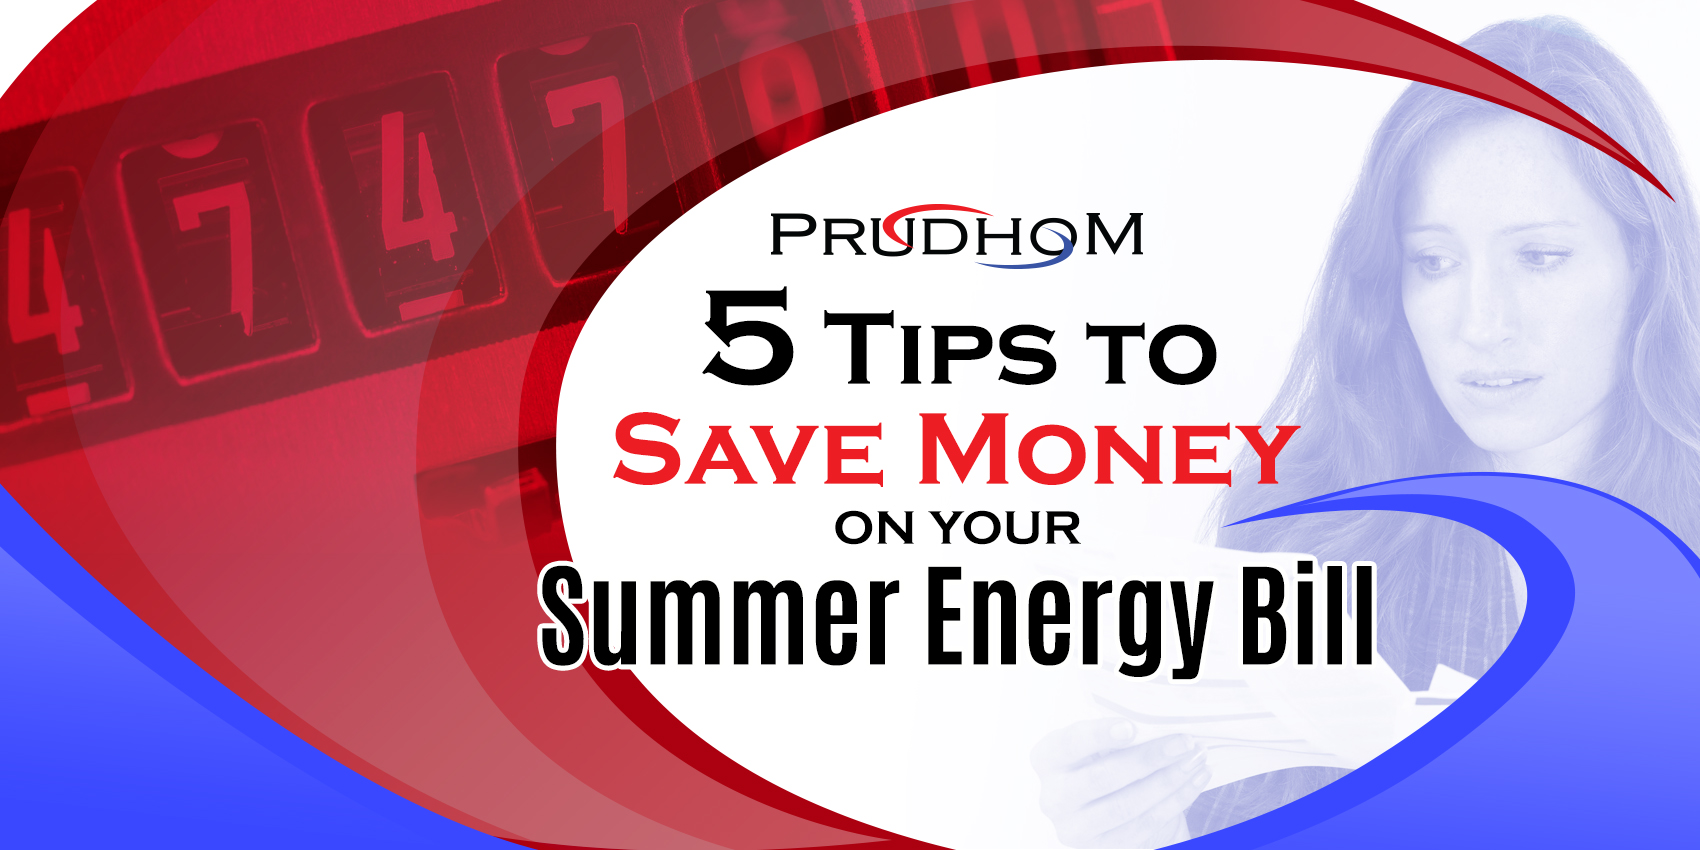 5 Tips to Save Money on Your Summer Energy Bill